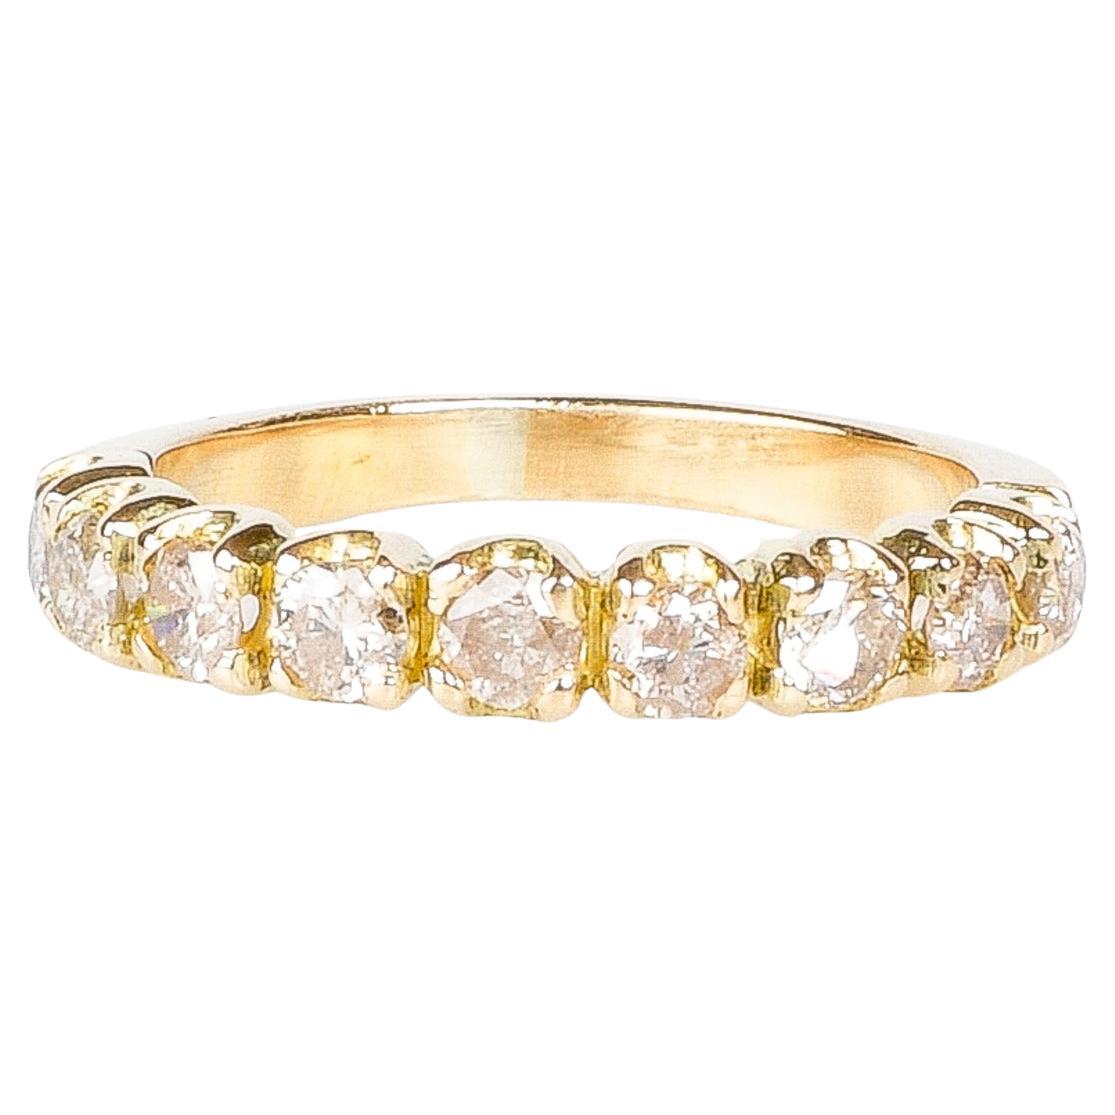  18k gold wedding ring adorned with nine beautiful diamonds For Sale